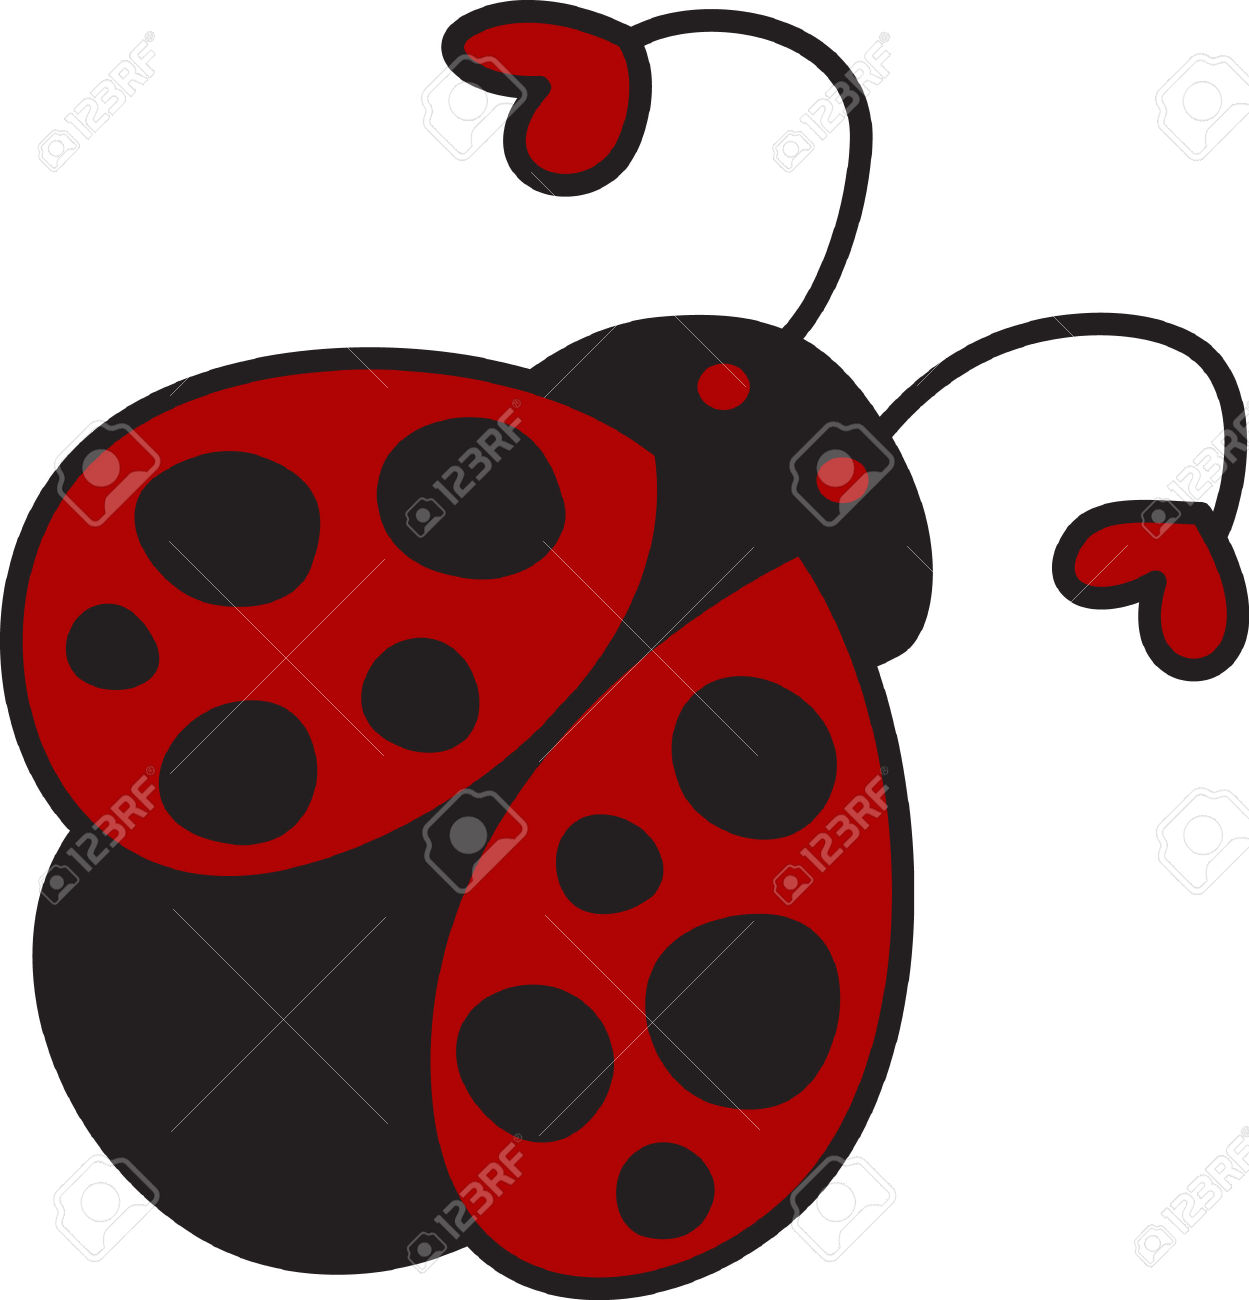 This Cute Ladybug Is Such A Sweet Way To Dress Up A Project.